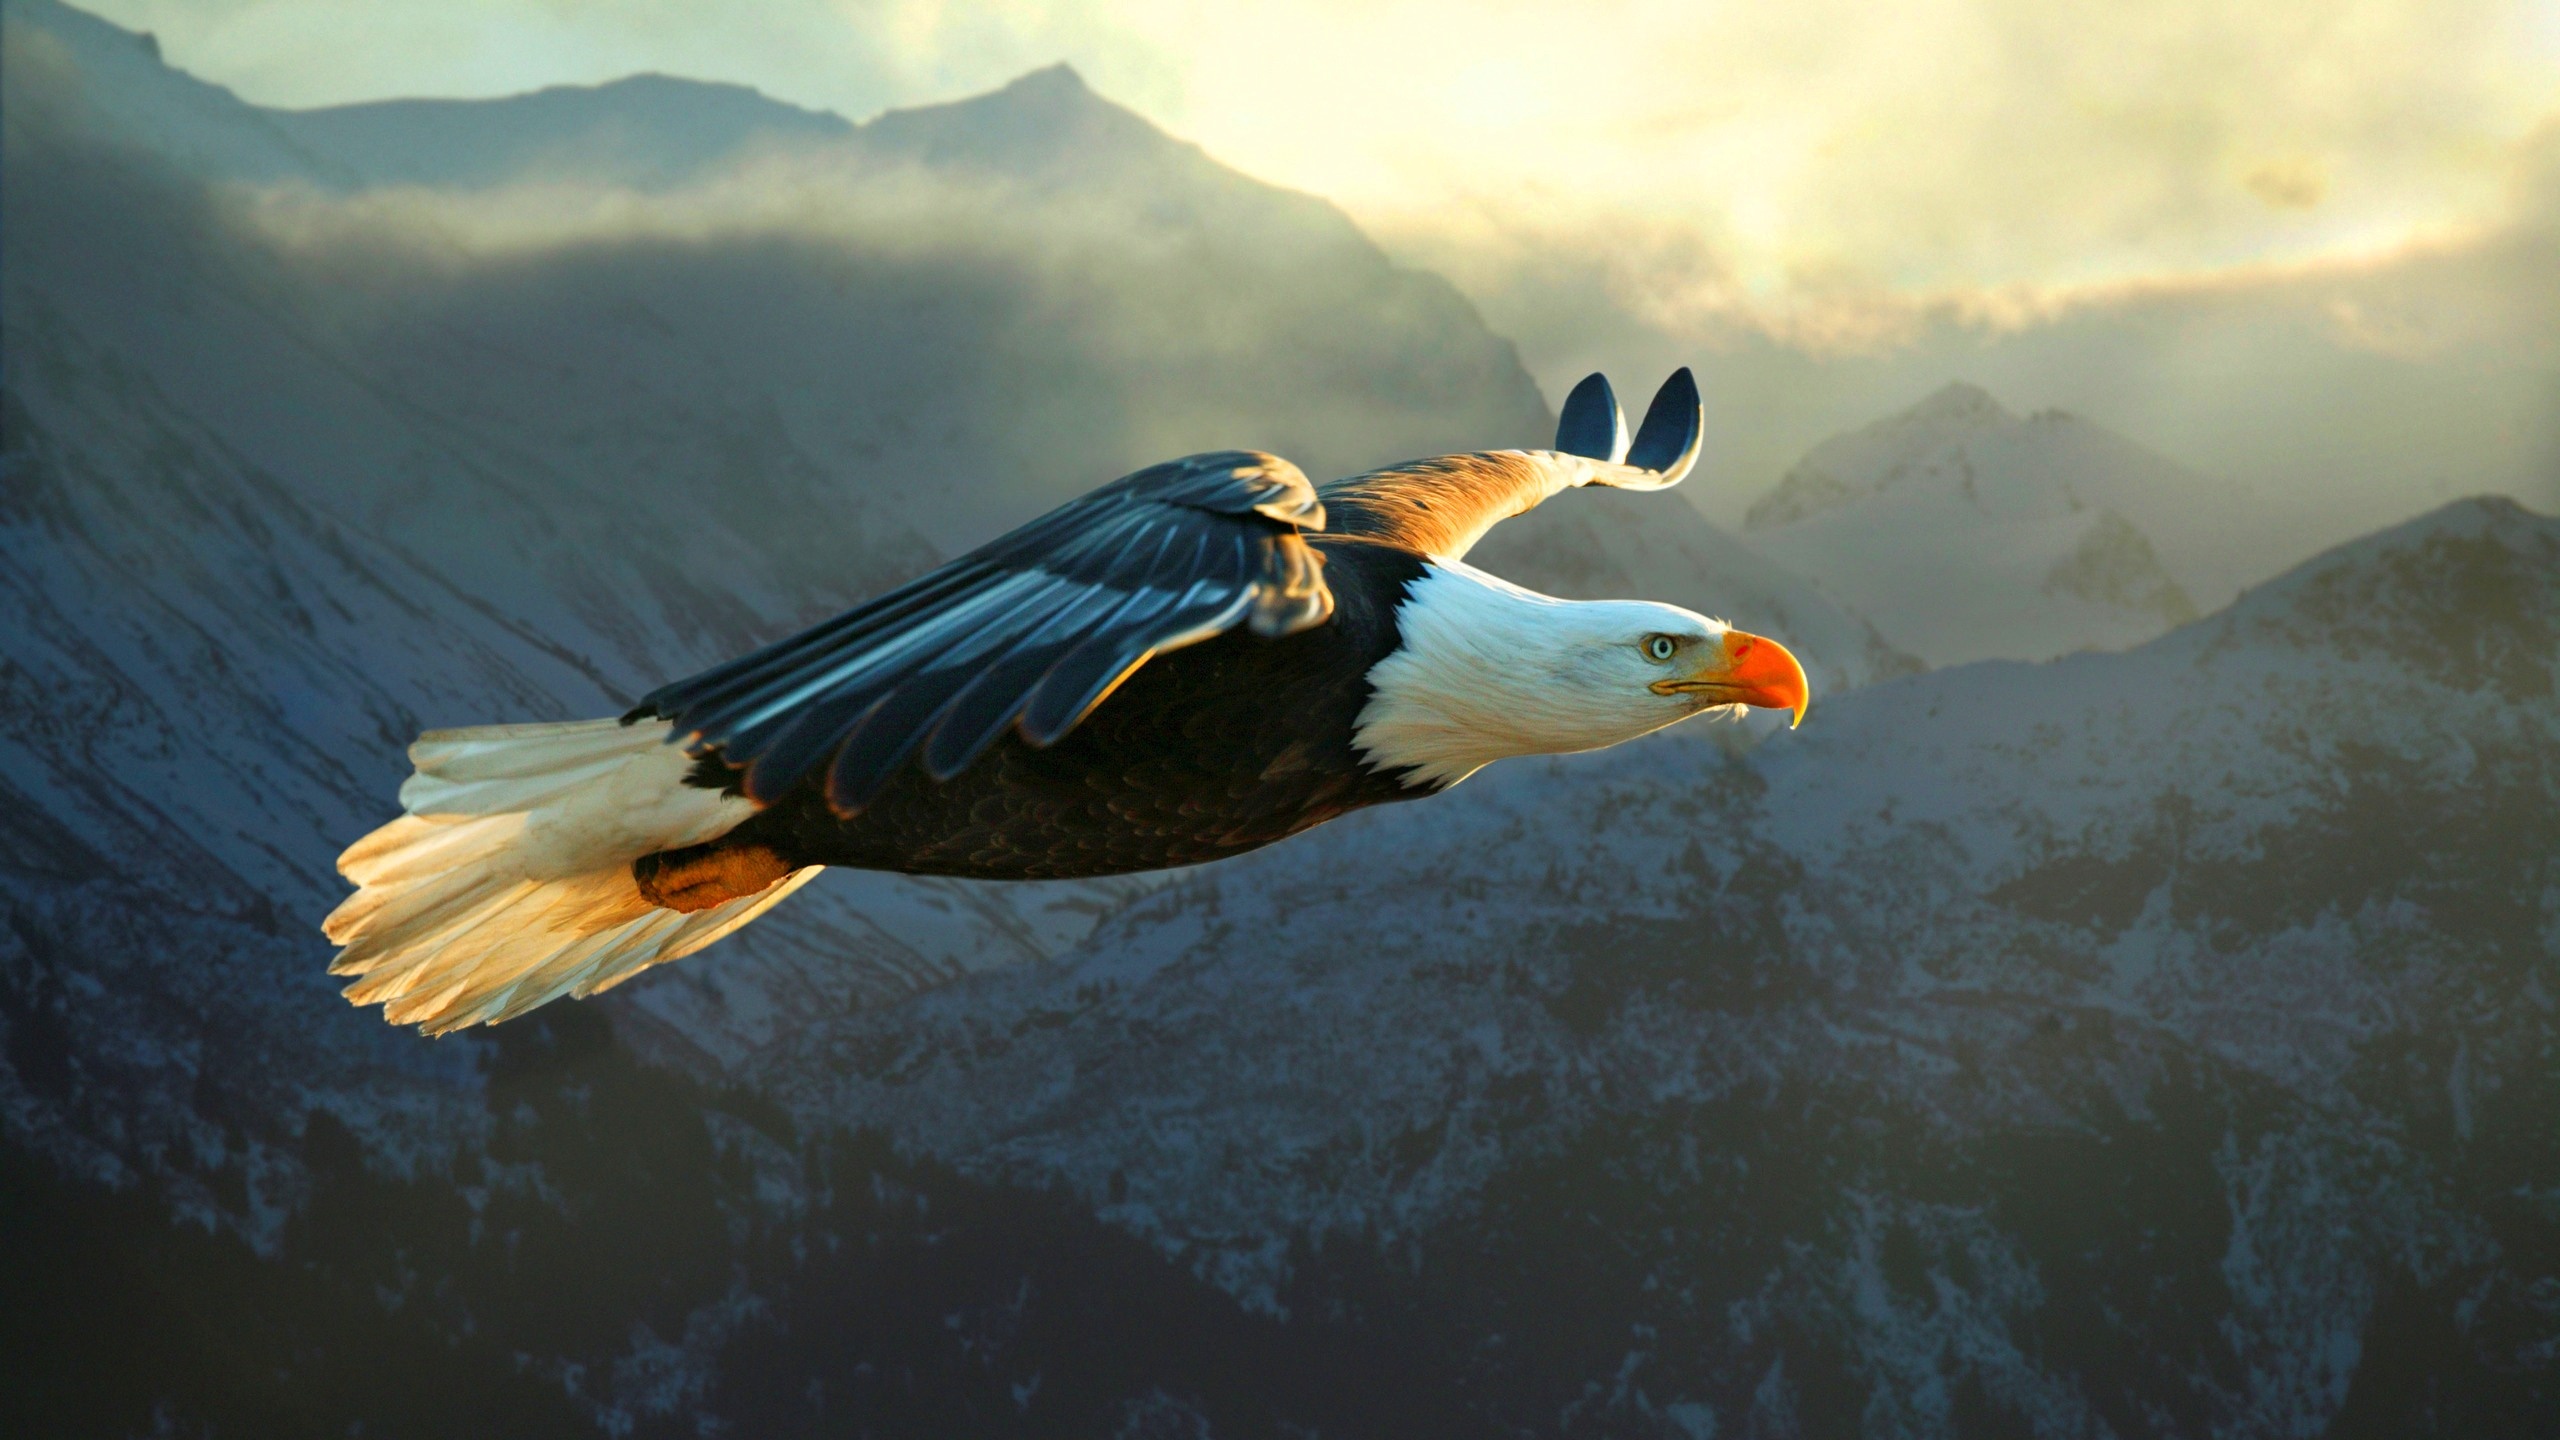 Eagle Fly Above Mountains Wallpaper   DreamLoveWallpapers